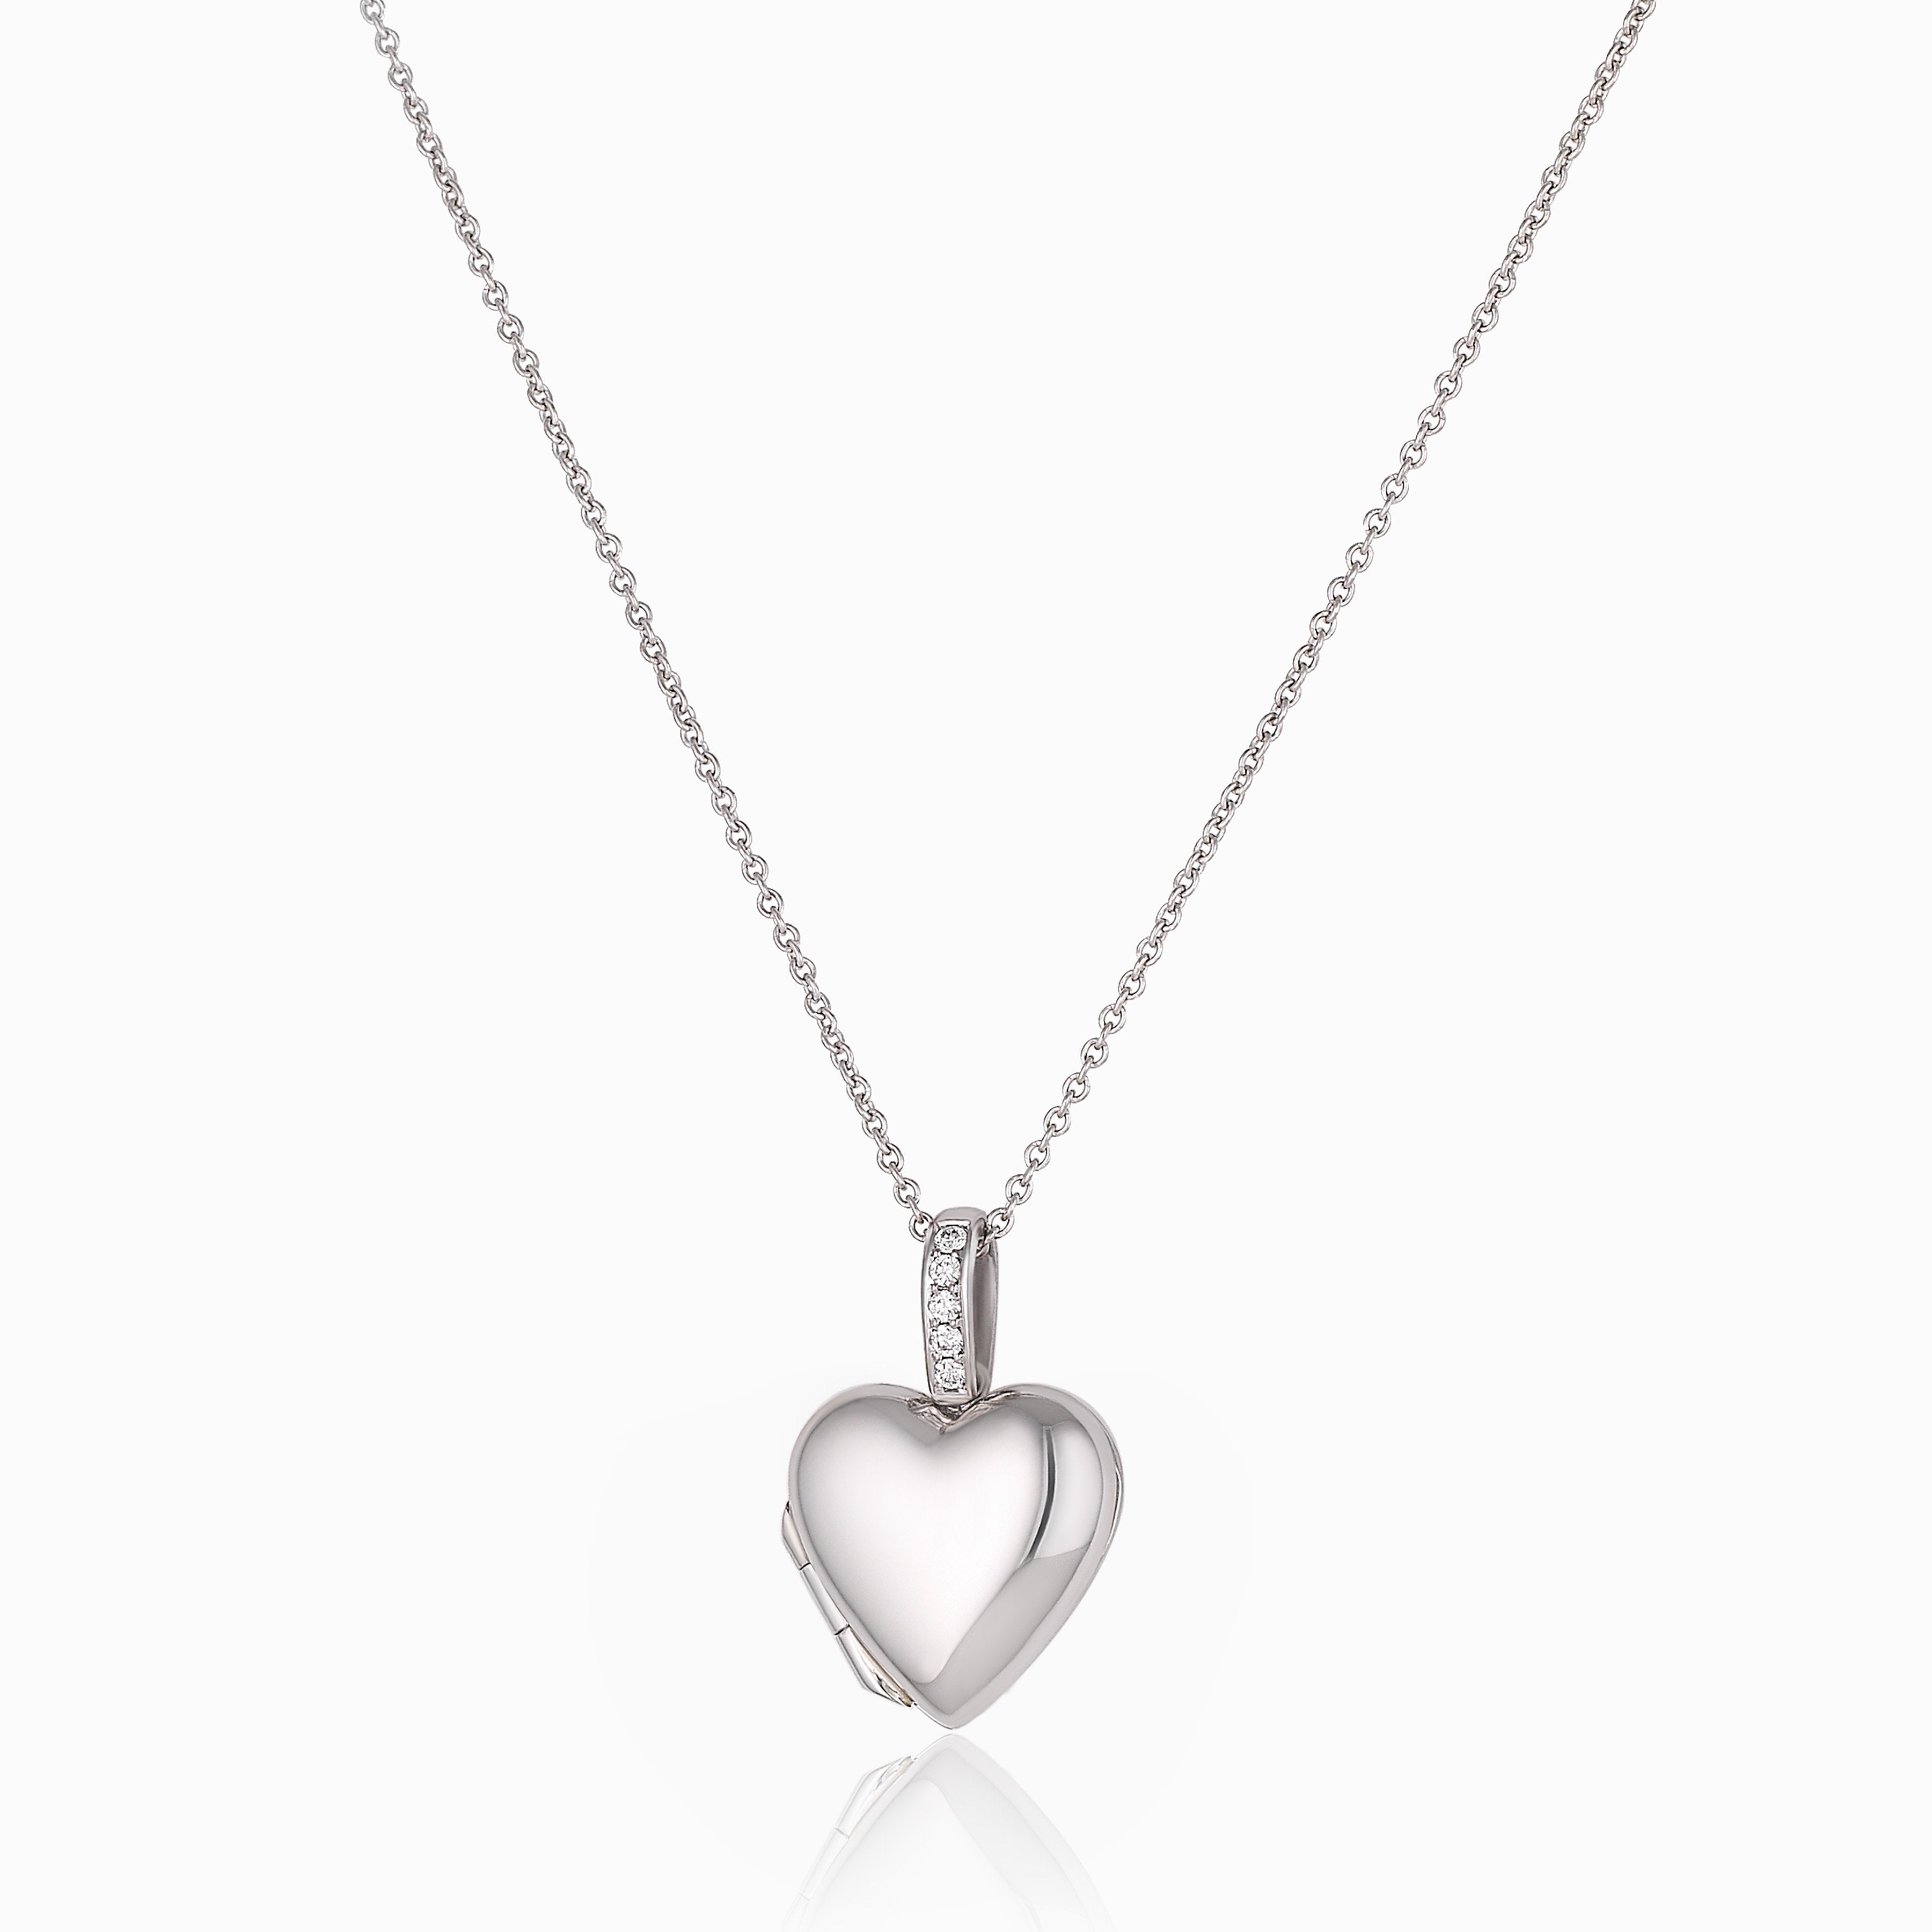 A platinum heart shaped locket, the bail set with diamonds, on a platinum chain.